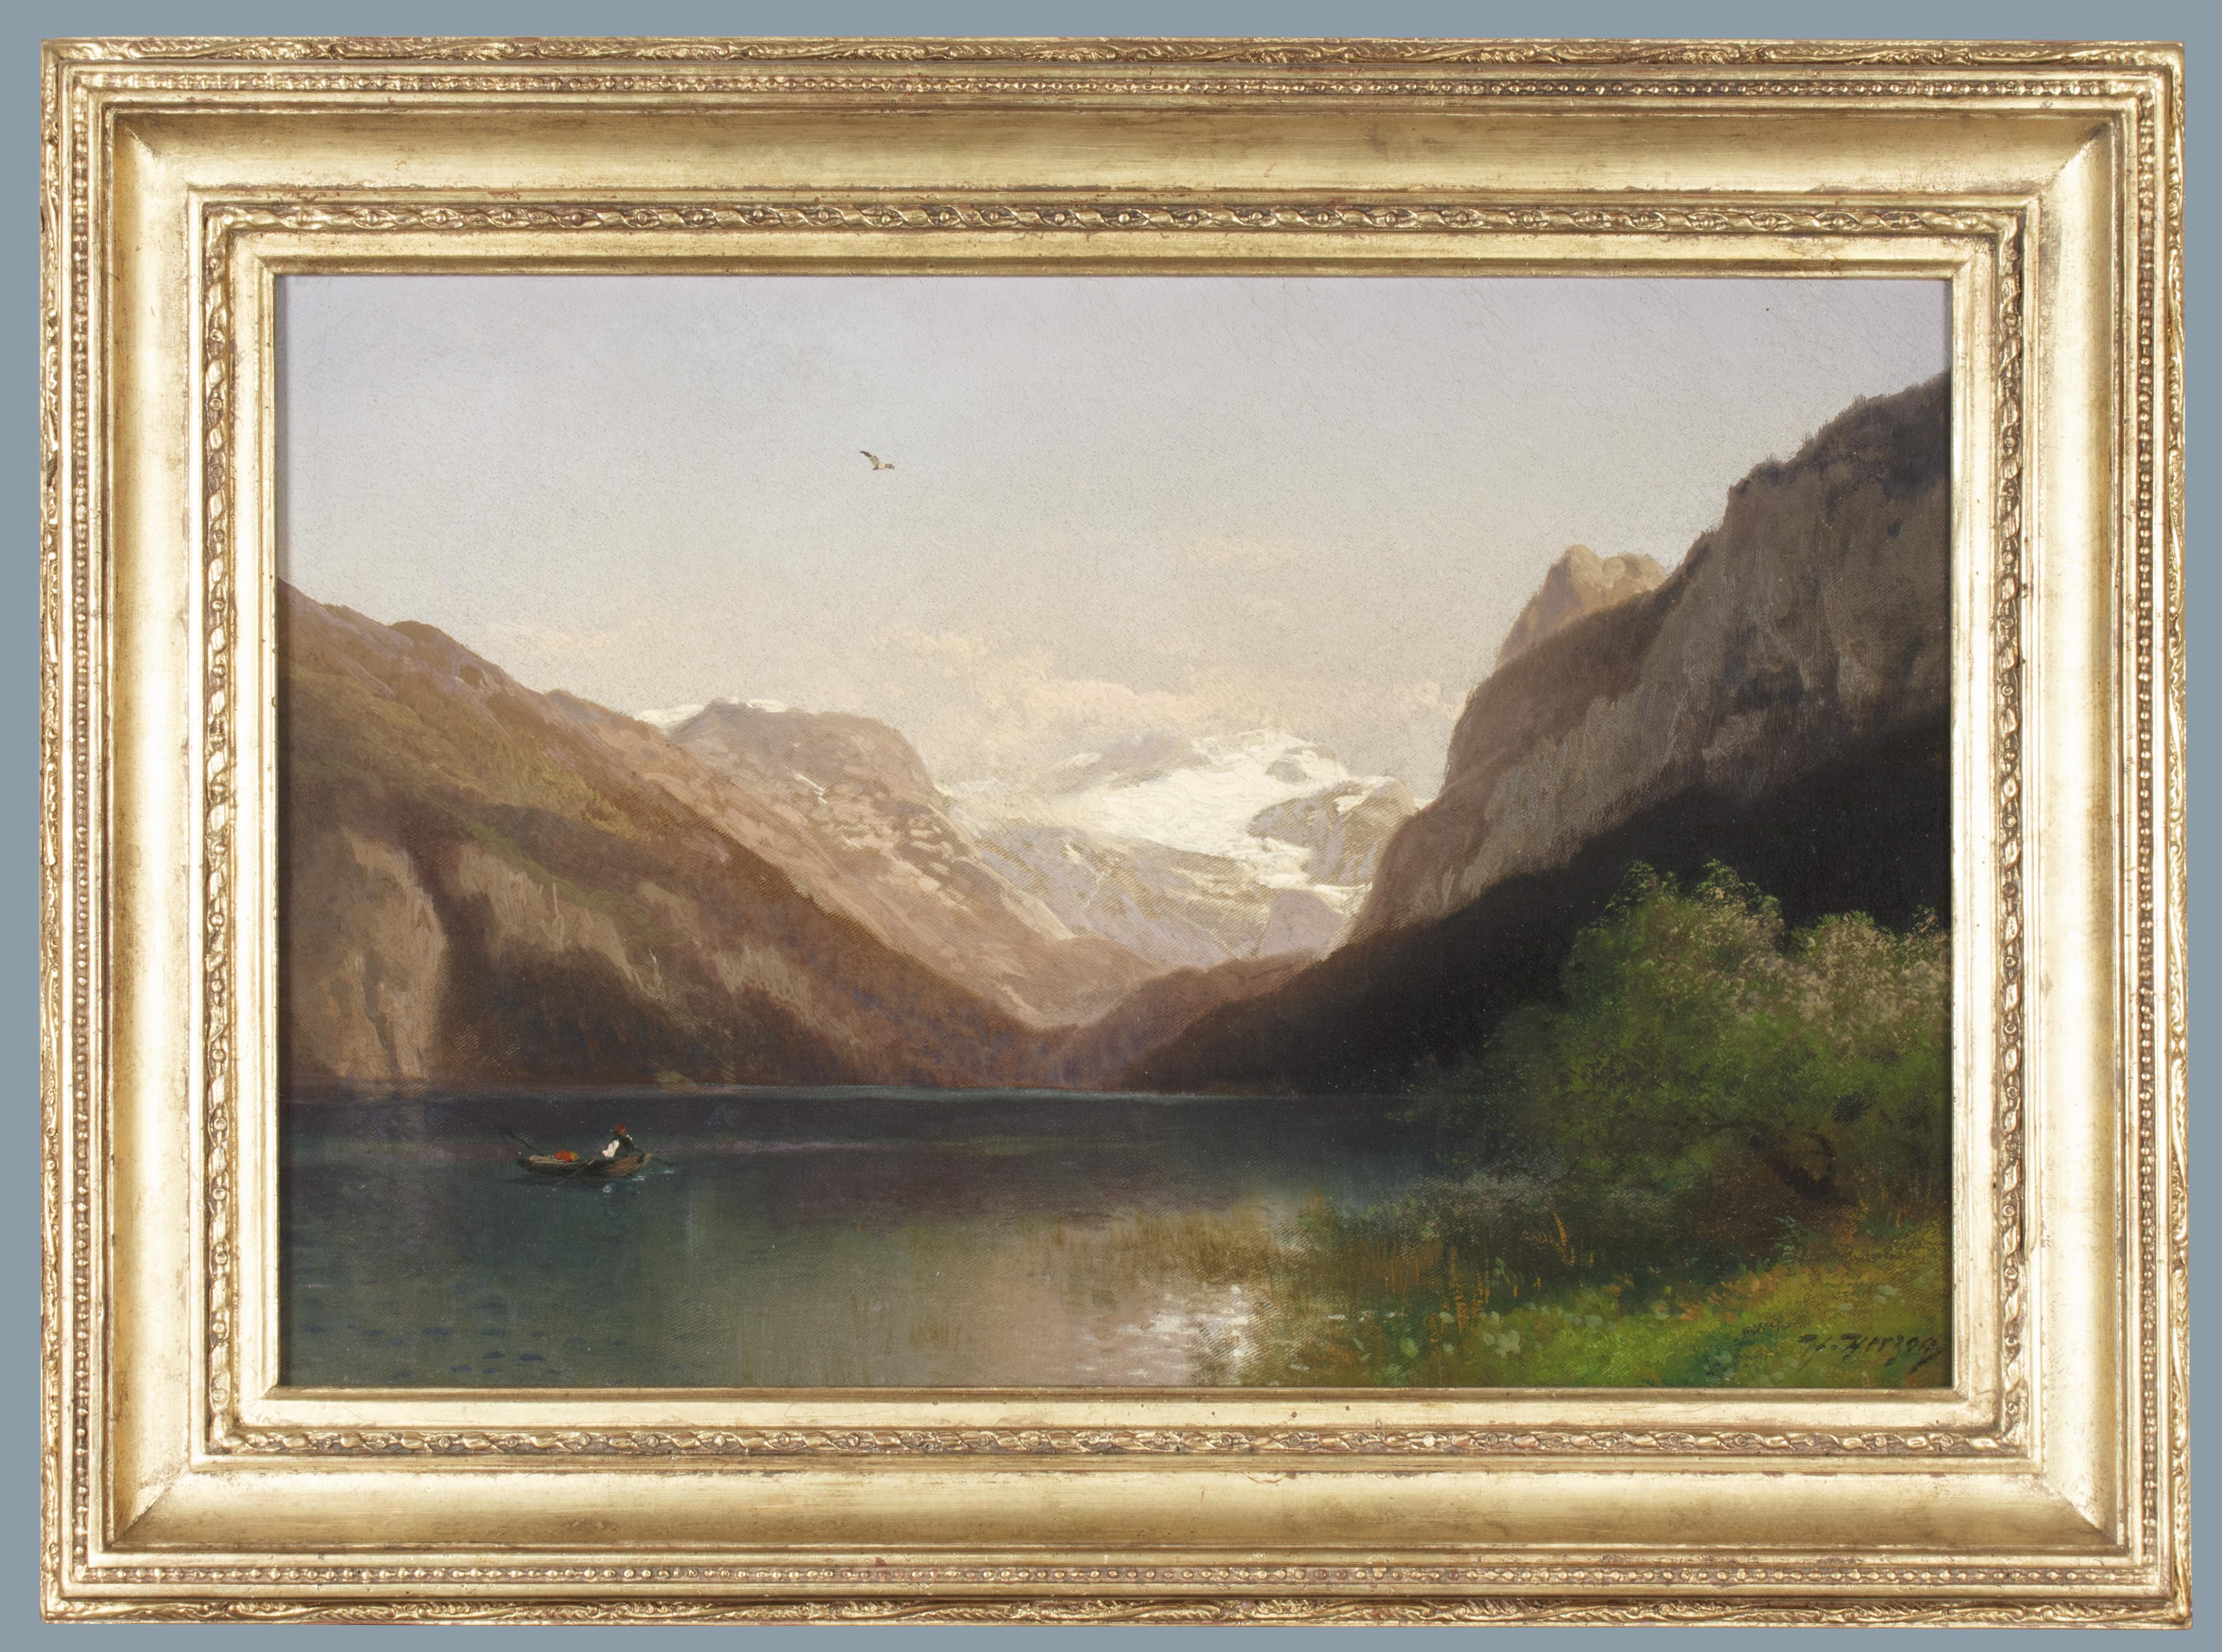 Herman Herzog
(American, born Germany, 1832-1932)
Evening at Lake Lucerne
Oil on canvas, 14 x 21 inches
Framed: 21 x 28 inches (approx.)
Signed at lower right: "Herman Herzog"

German born Herman Herzog studied at the Dusseldorf Academy under such